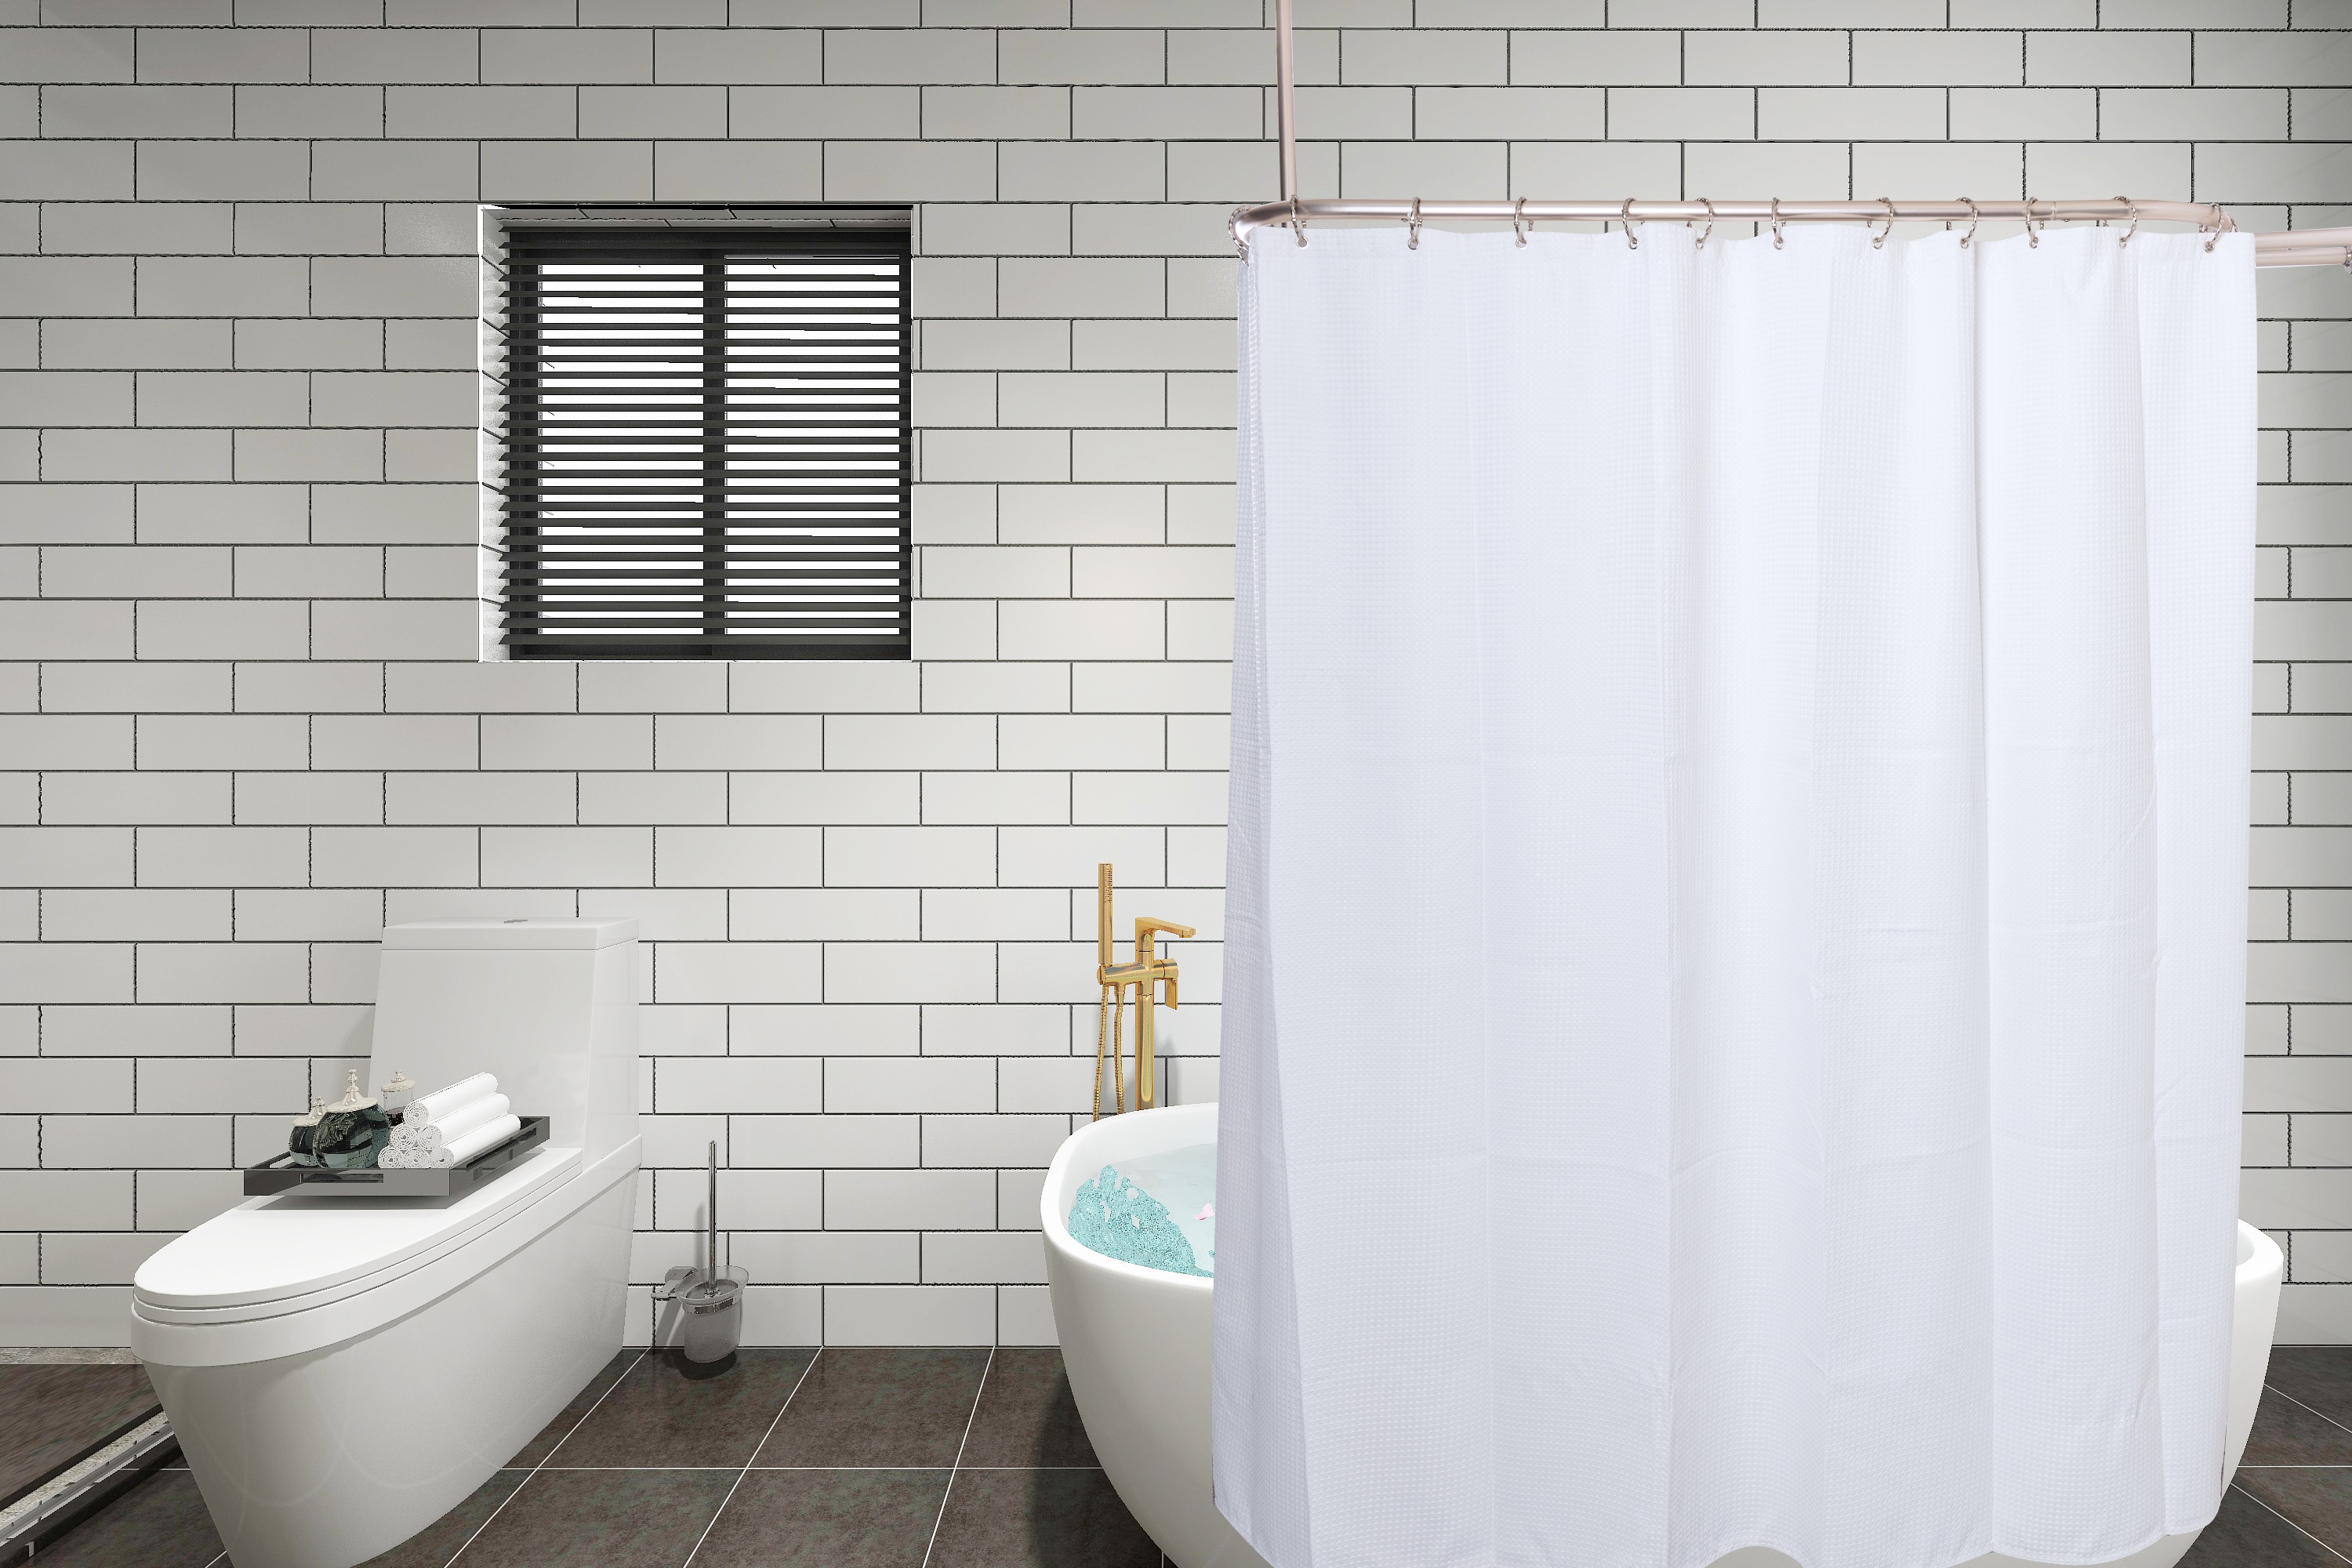 Utopia Alley 24 In To 58 3 Brushed Nickel Fixed Clawfoot Tub Shower Curtain Rod The Rods Department At Lowes Com